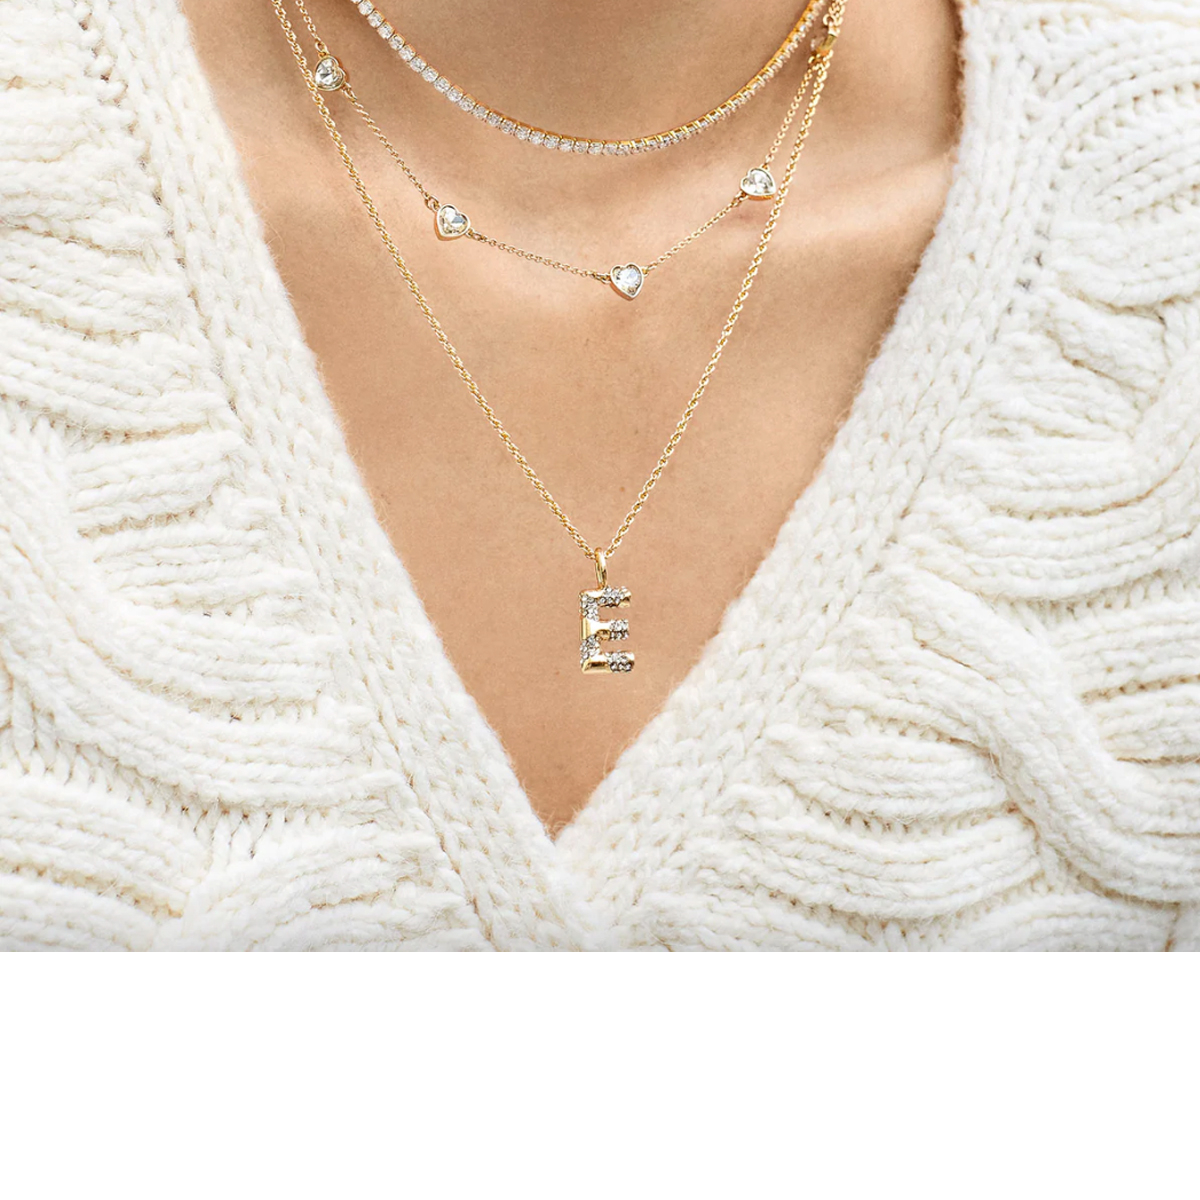 BaubleBar 80% Off Sale: Get Jewelry and Accessories Starting at $4